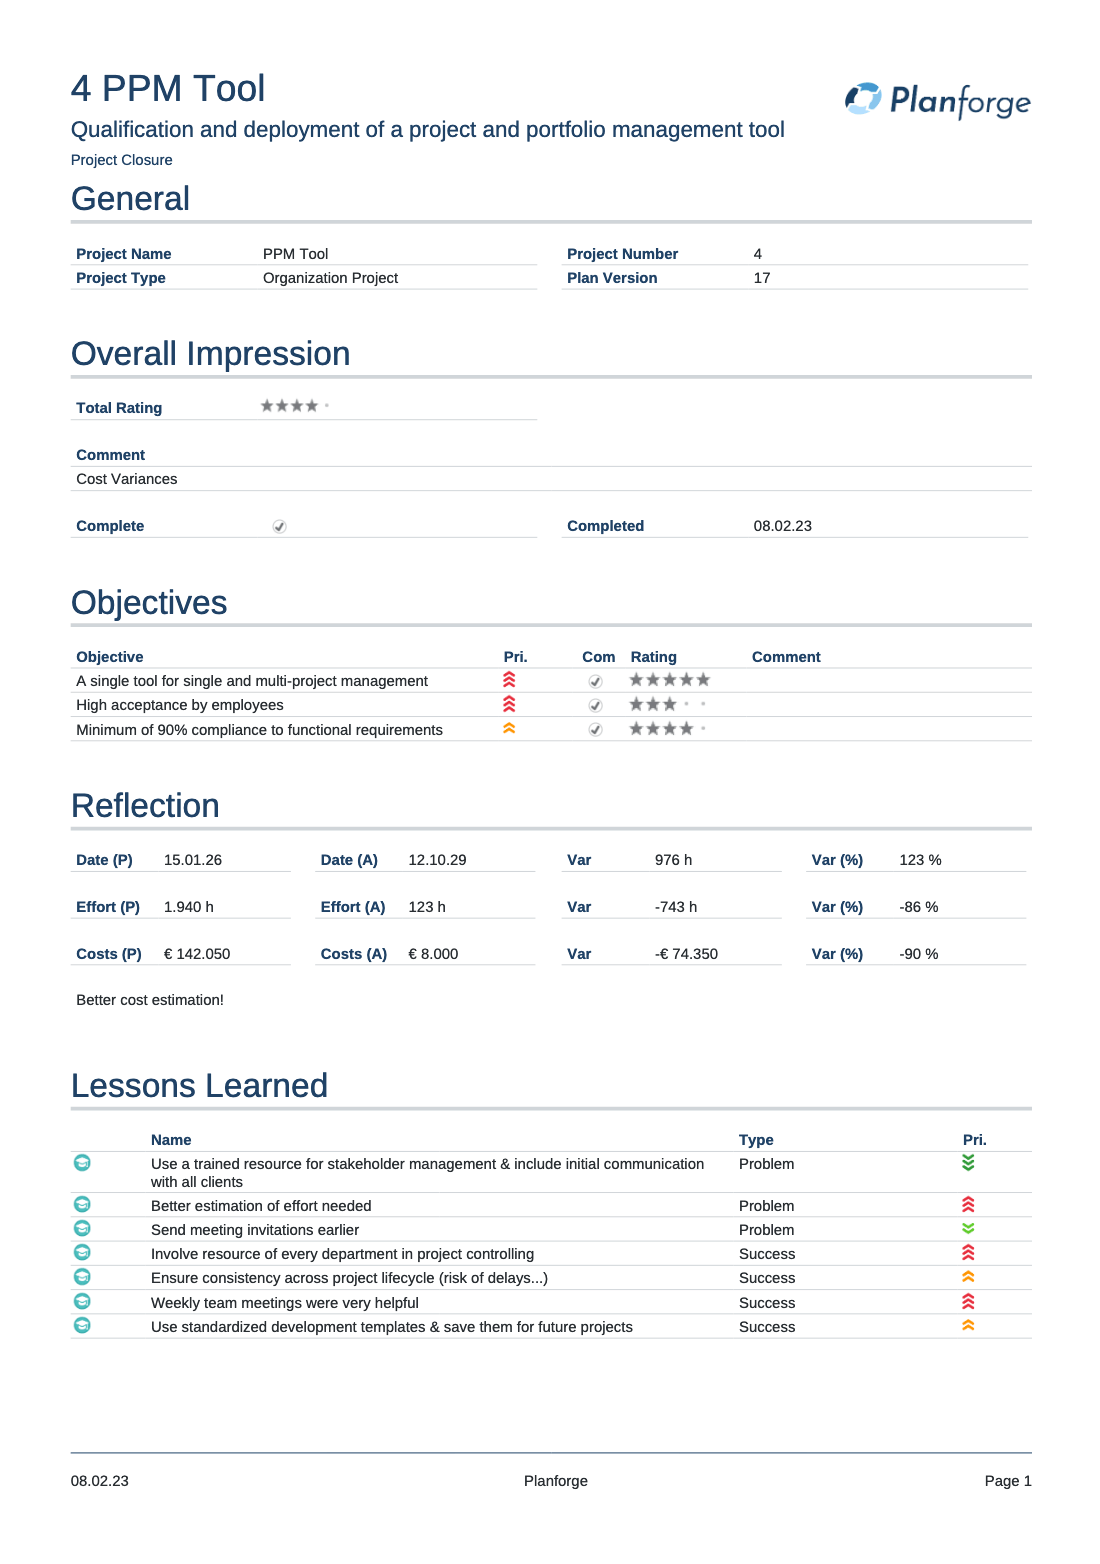 Project Closure Report Software by Planforge